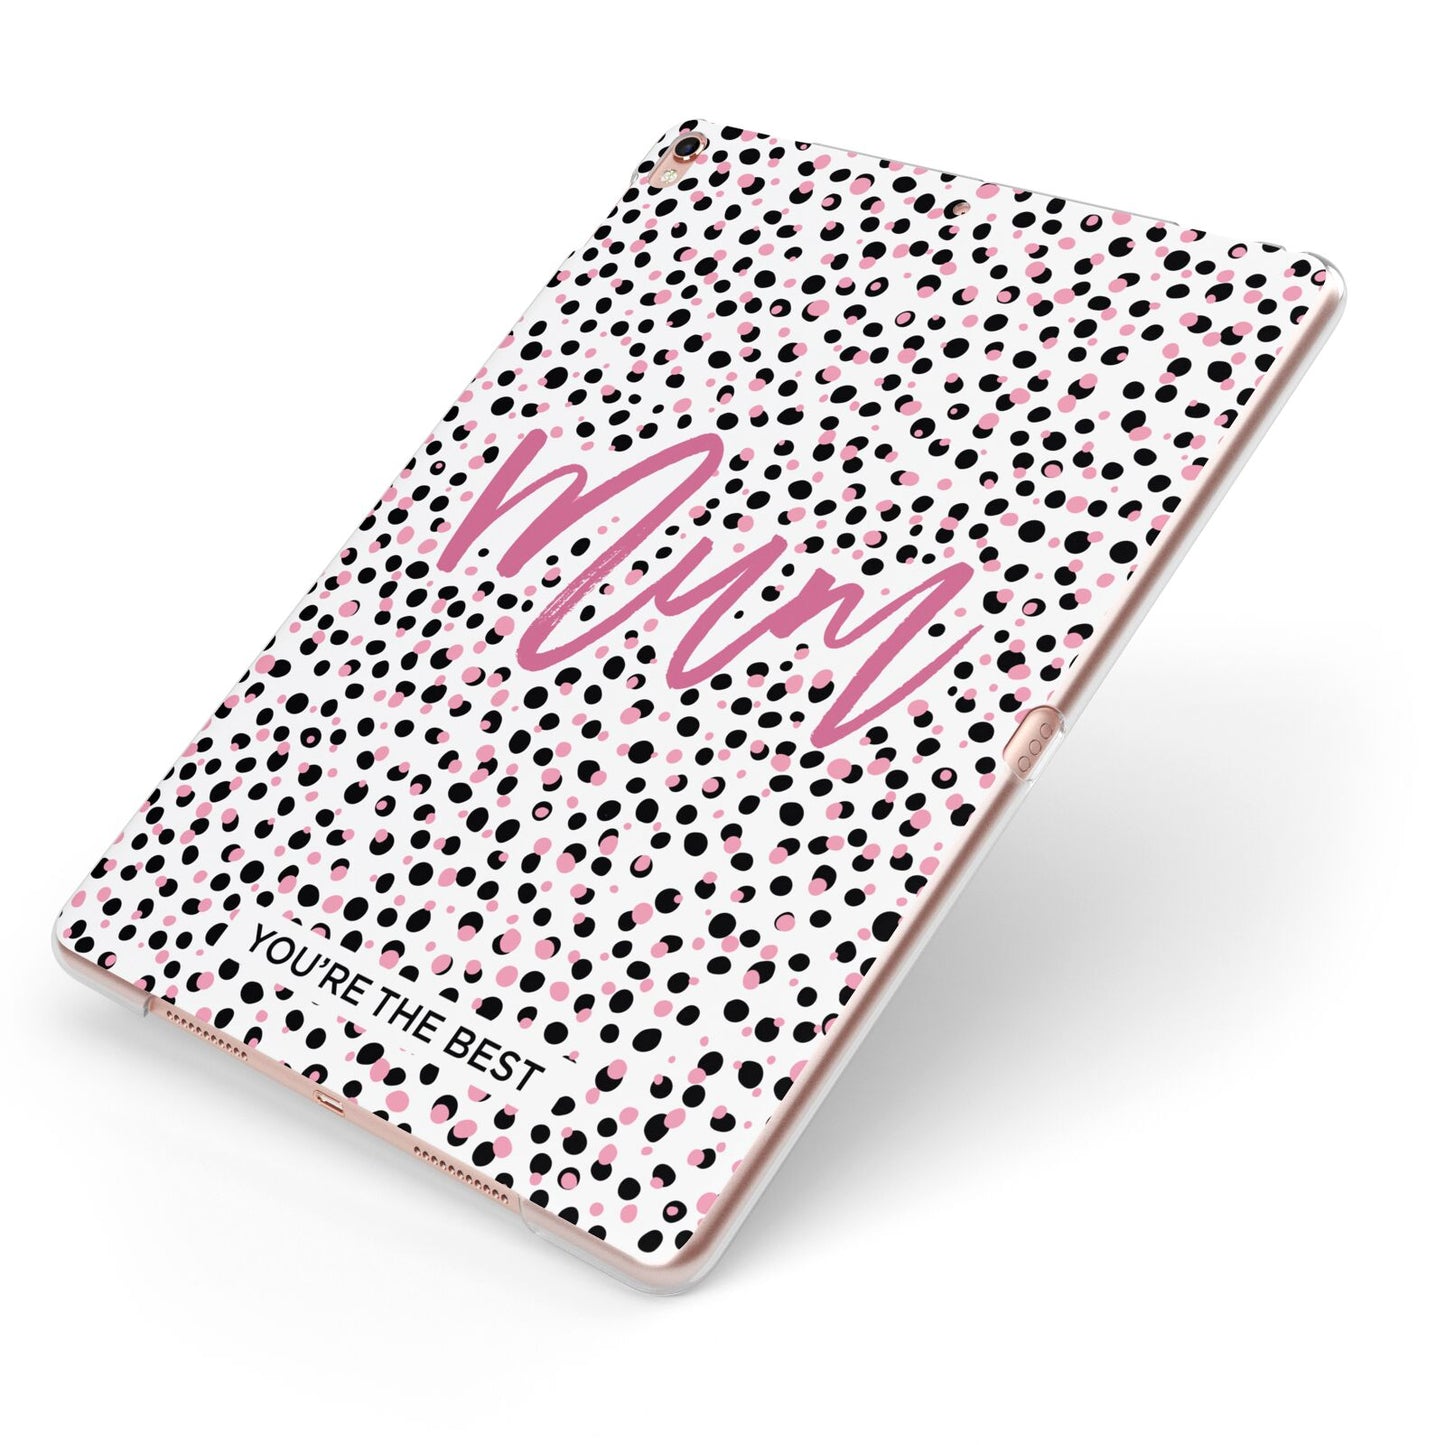 Mum Polka Dots Mothers Day Apple iPad Case on Rose Gold iPad Side View